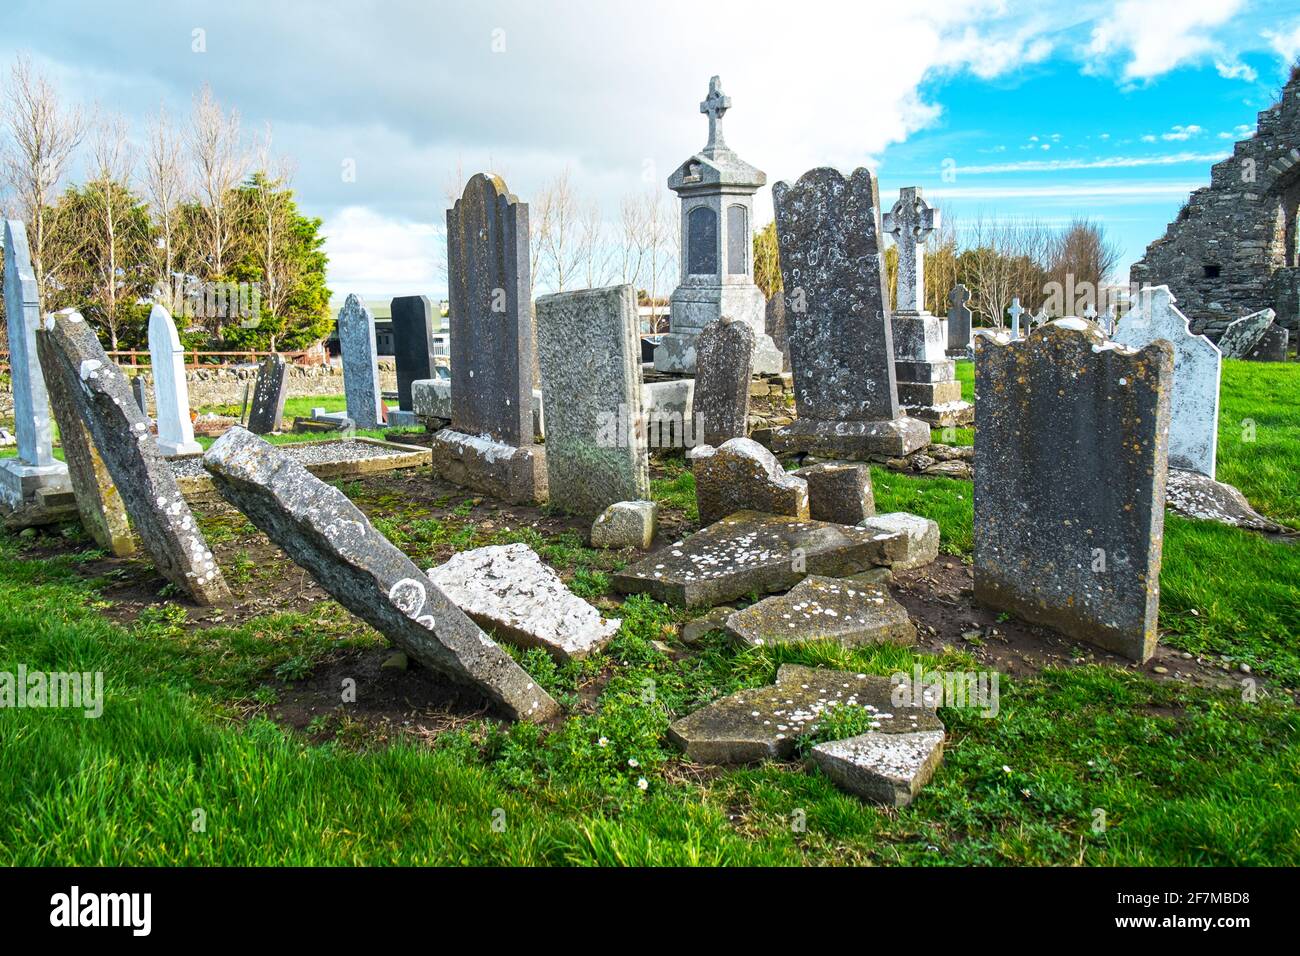 Gravestones in a neglected old section of an Irish graveyard Stock Photo